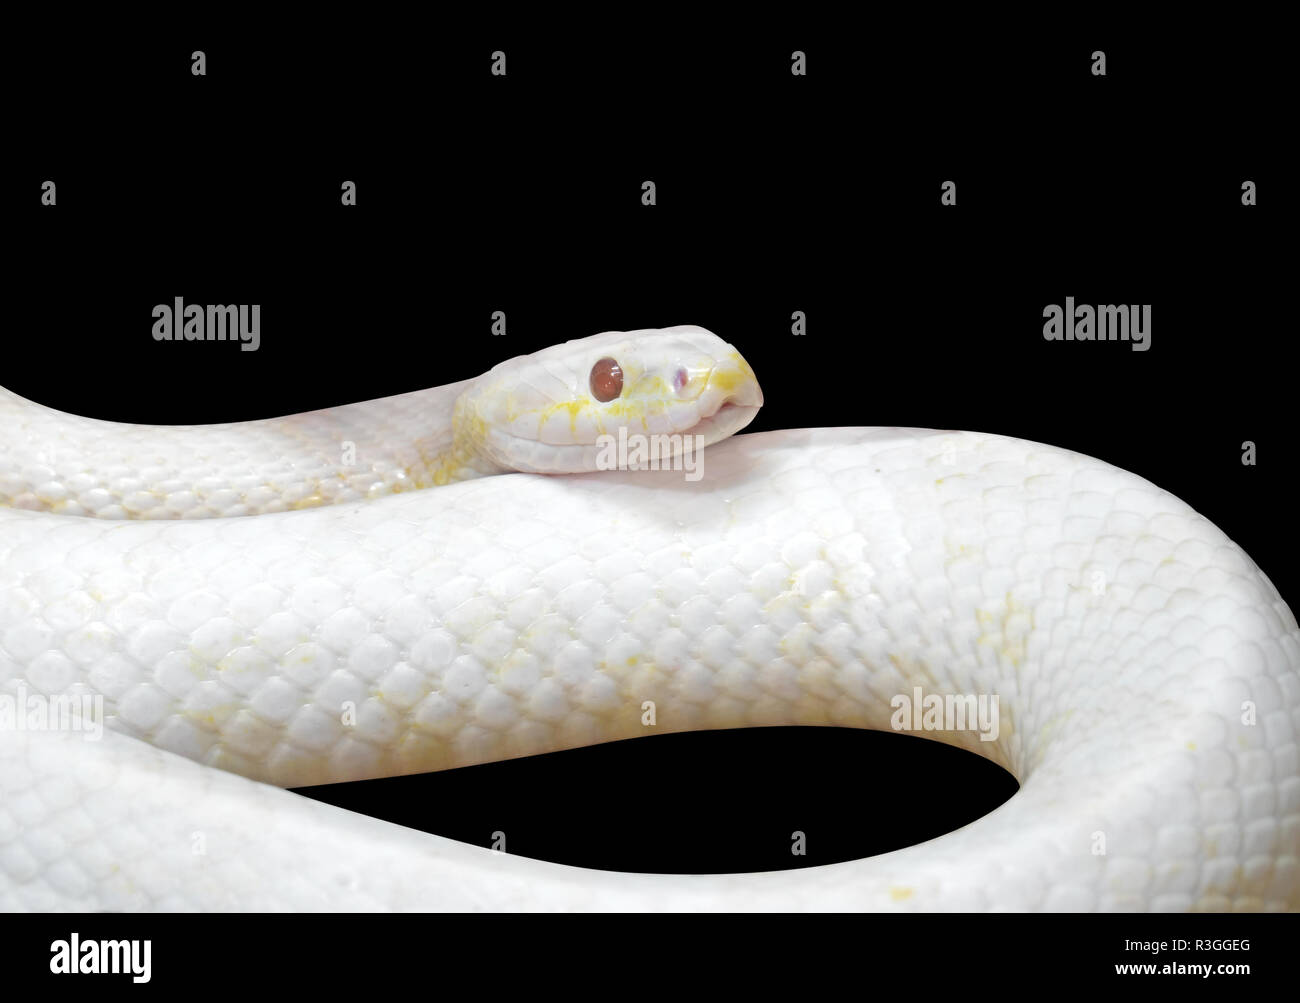 Albino Black Rat Snake Coiled Isolated on Black Background with Clipping Path Stock Photo